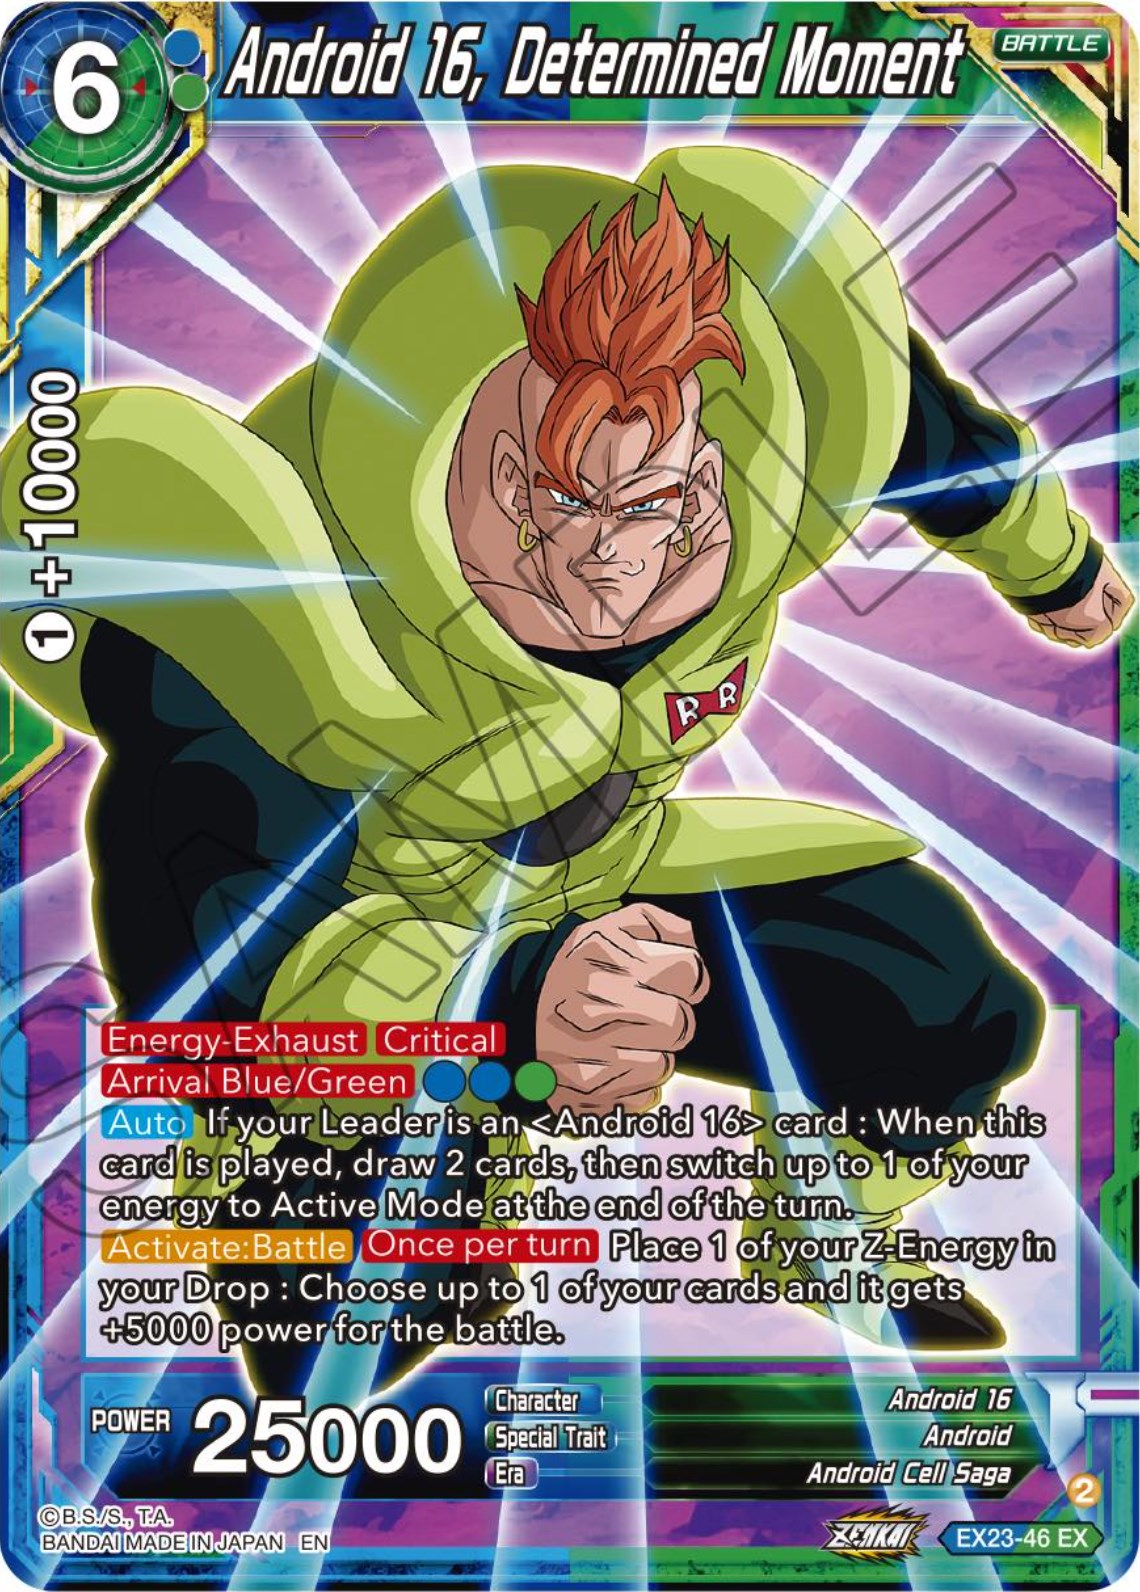 Android 16, Determined Moment (EX23-46) [Premium Anniversary Box 2023] | North Valley Games